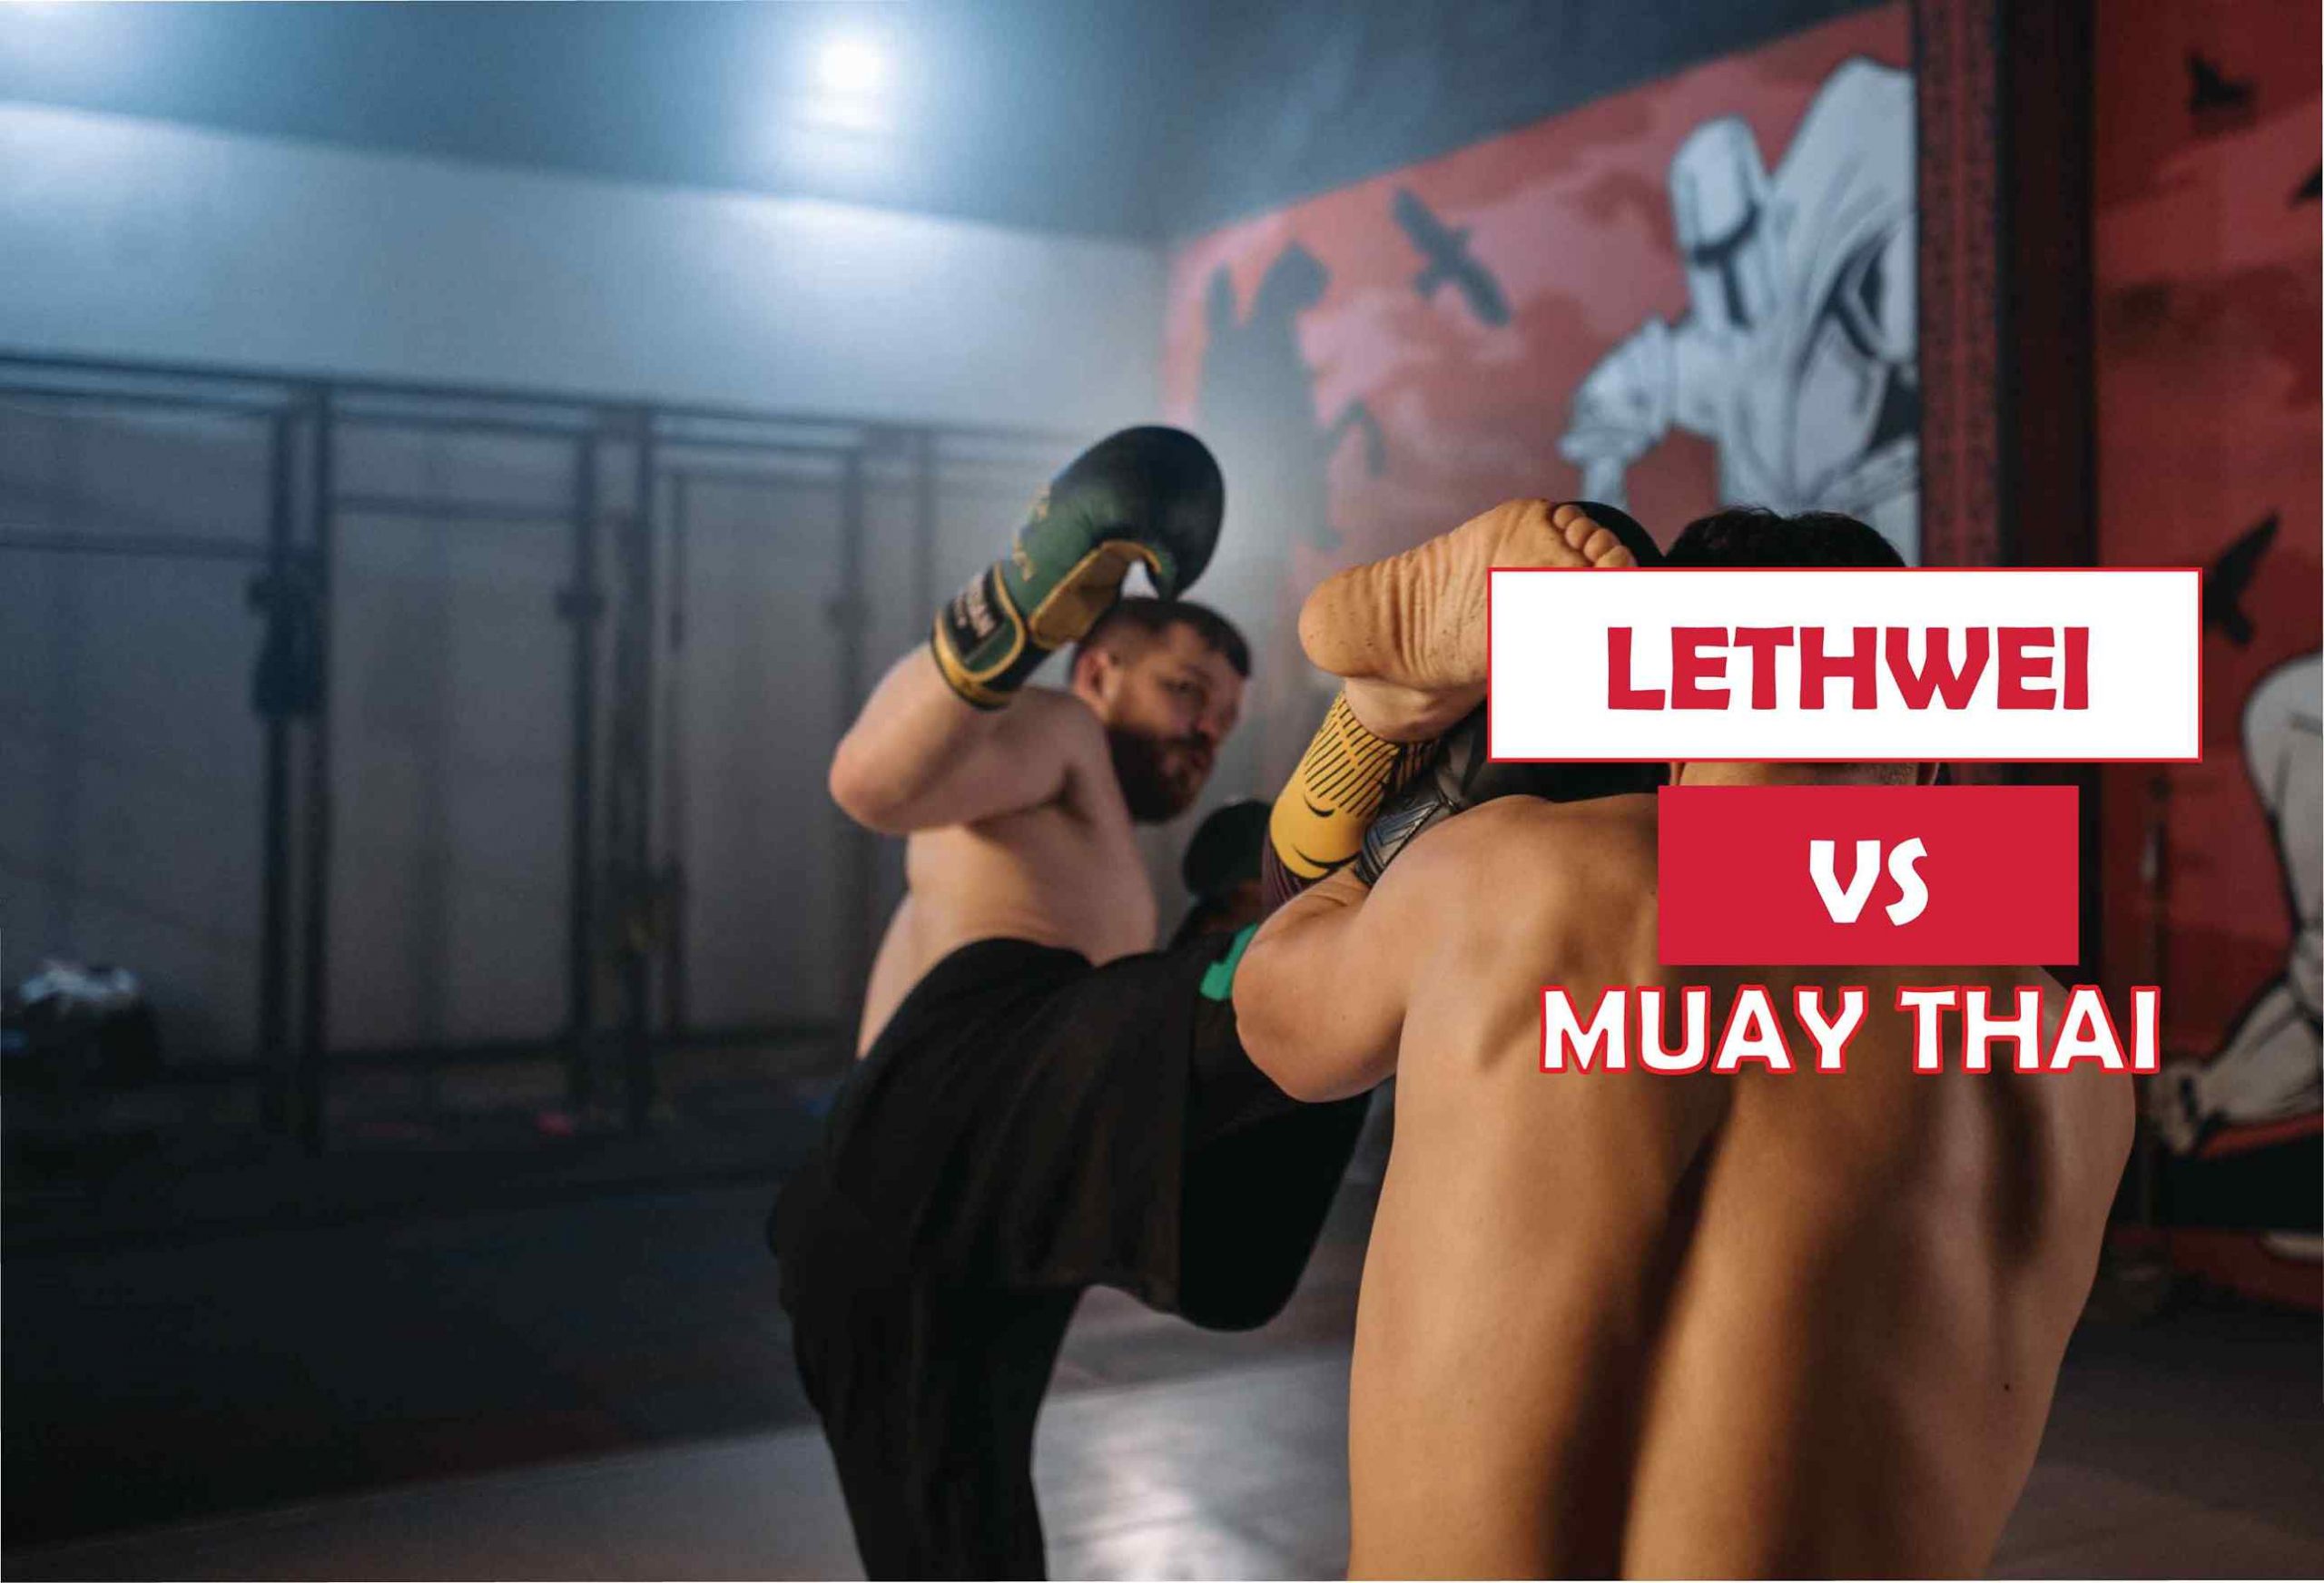 Lethwei Vs Muay Thai – Which Is More Effective?